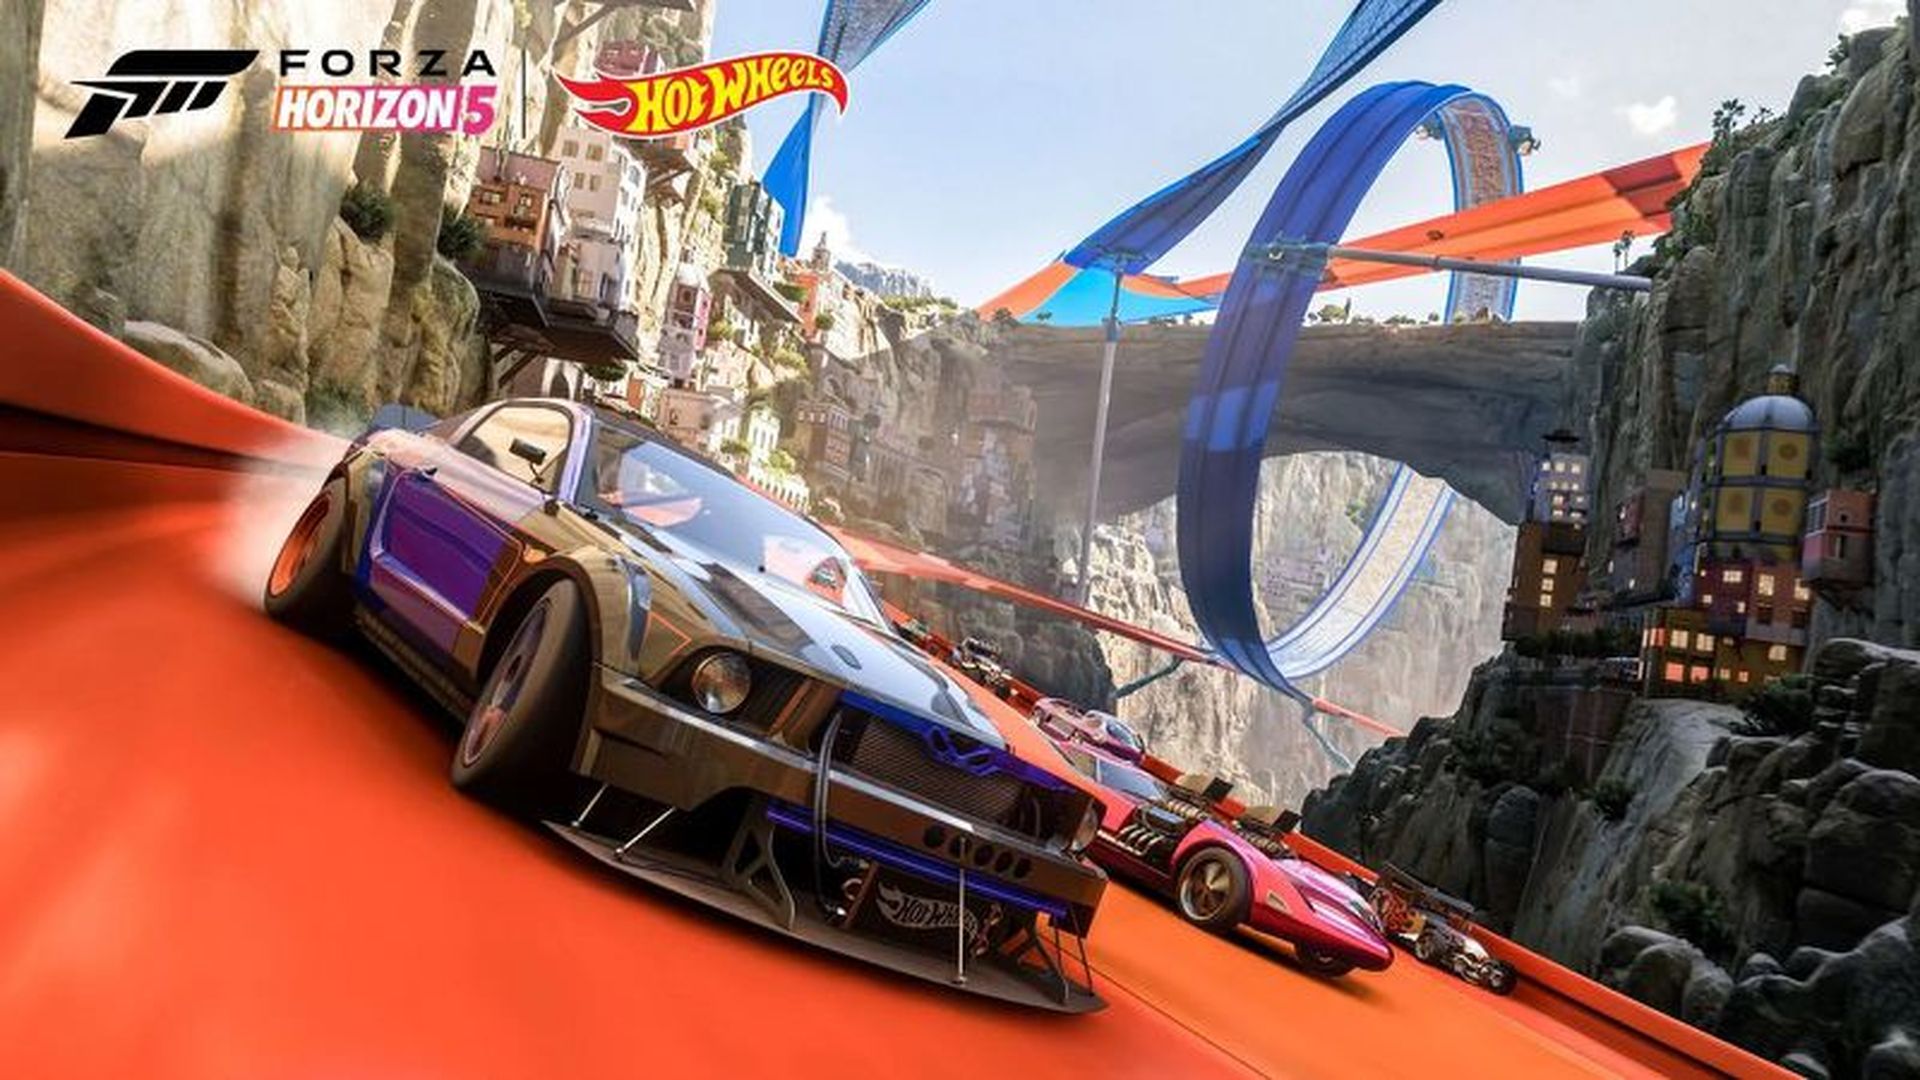 Ladies and gentleman Forza Horizon 5 Hot Wheels DLC is out and it  brings a new racing hub and the game's course construction toolkit together with a fleet of die-cast artifacts and plastic track infrastructure.